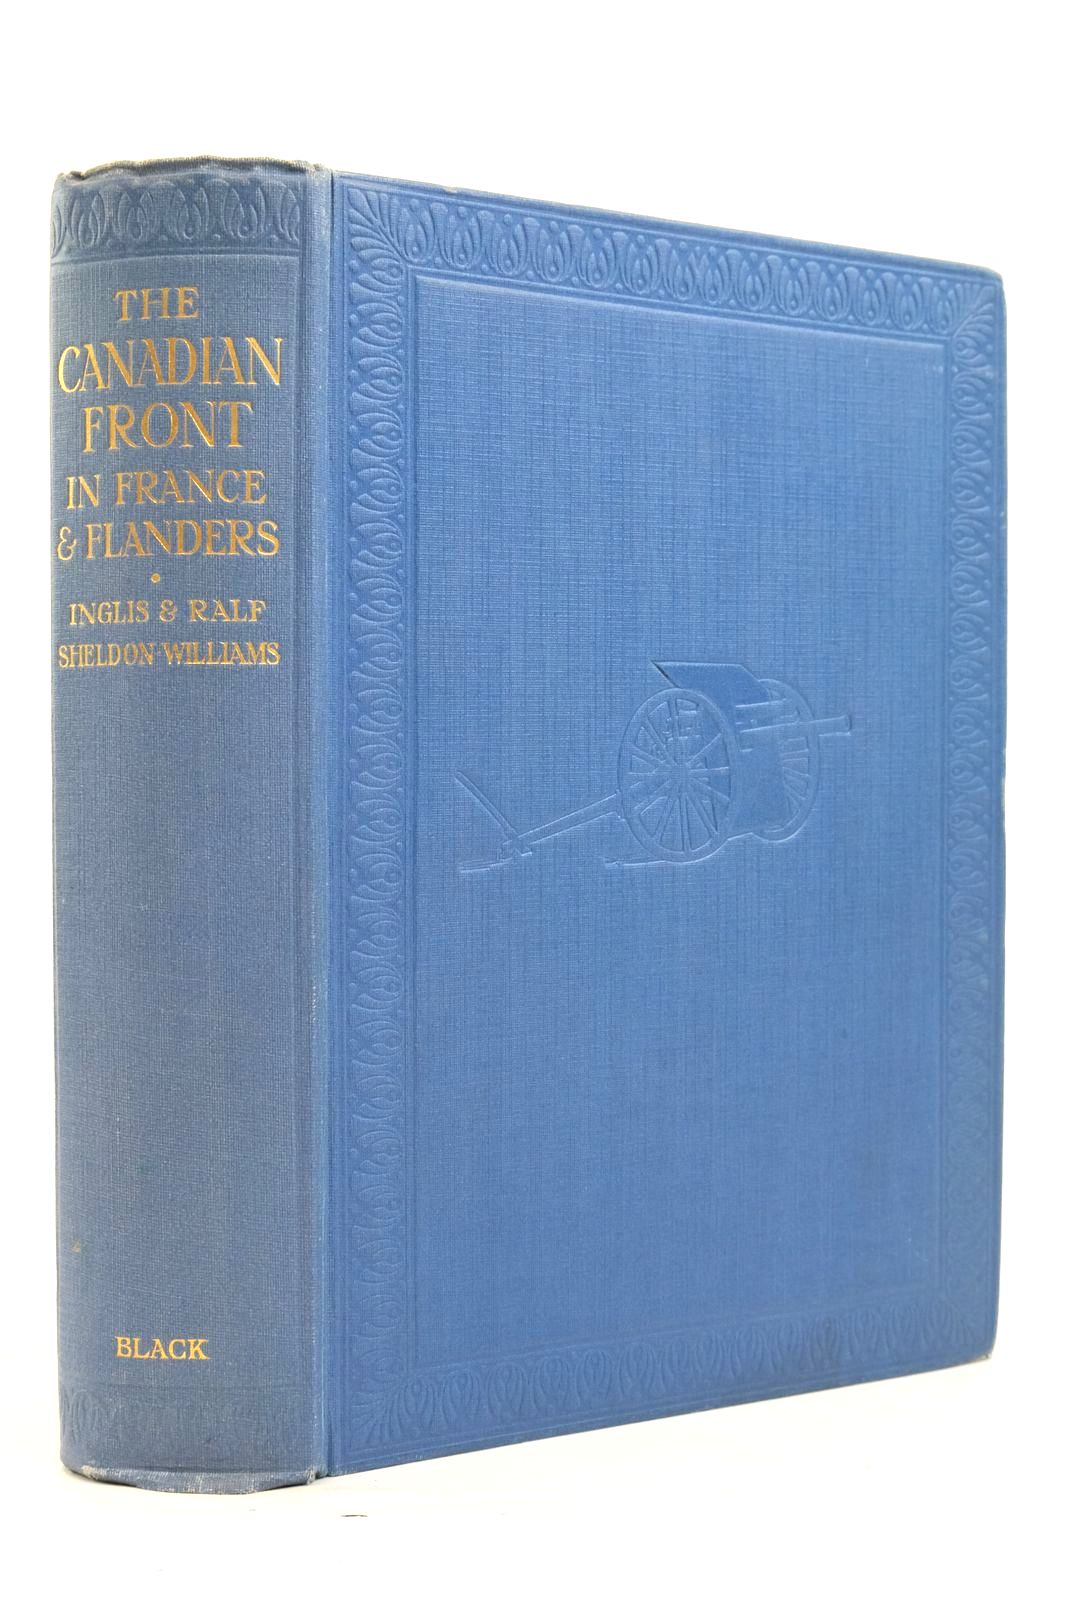 Photo of THE CANADIAN FRONT IN FRANCE AND FLANDERS written by Sheldon-Williams, Ralf Frederic Lardy illustrated by Sheldon-Williams, Inglis published by A. &amp; C. Black Ltd. (STOCK CODE: 2137335)  for sale by Stella & Rose's Books